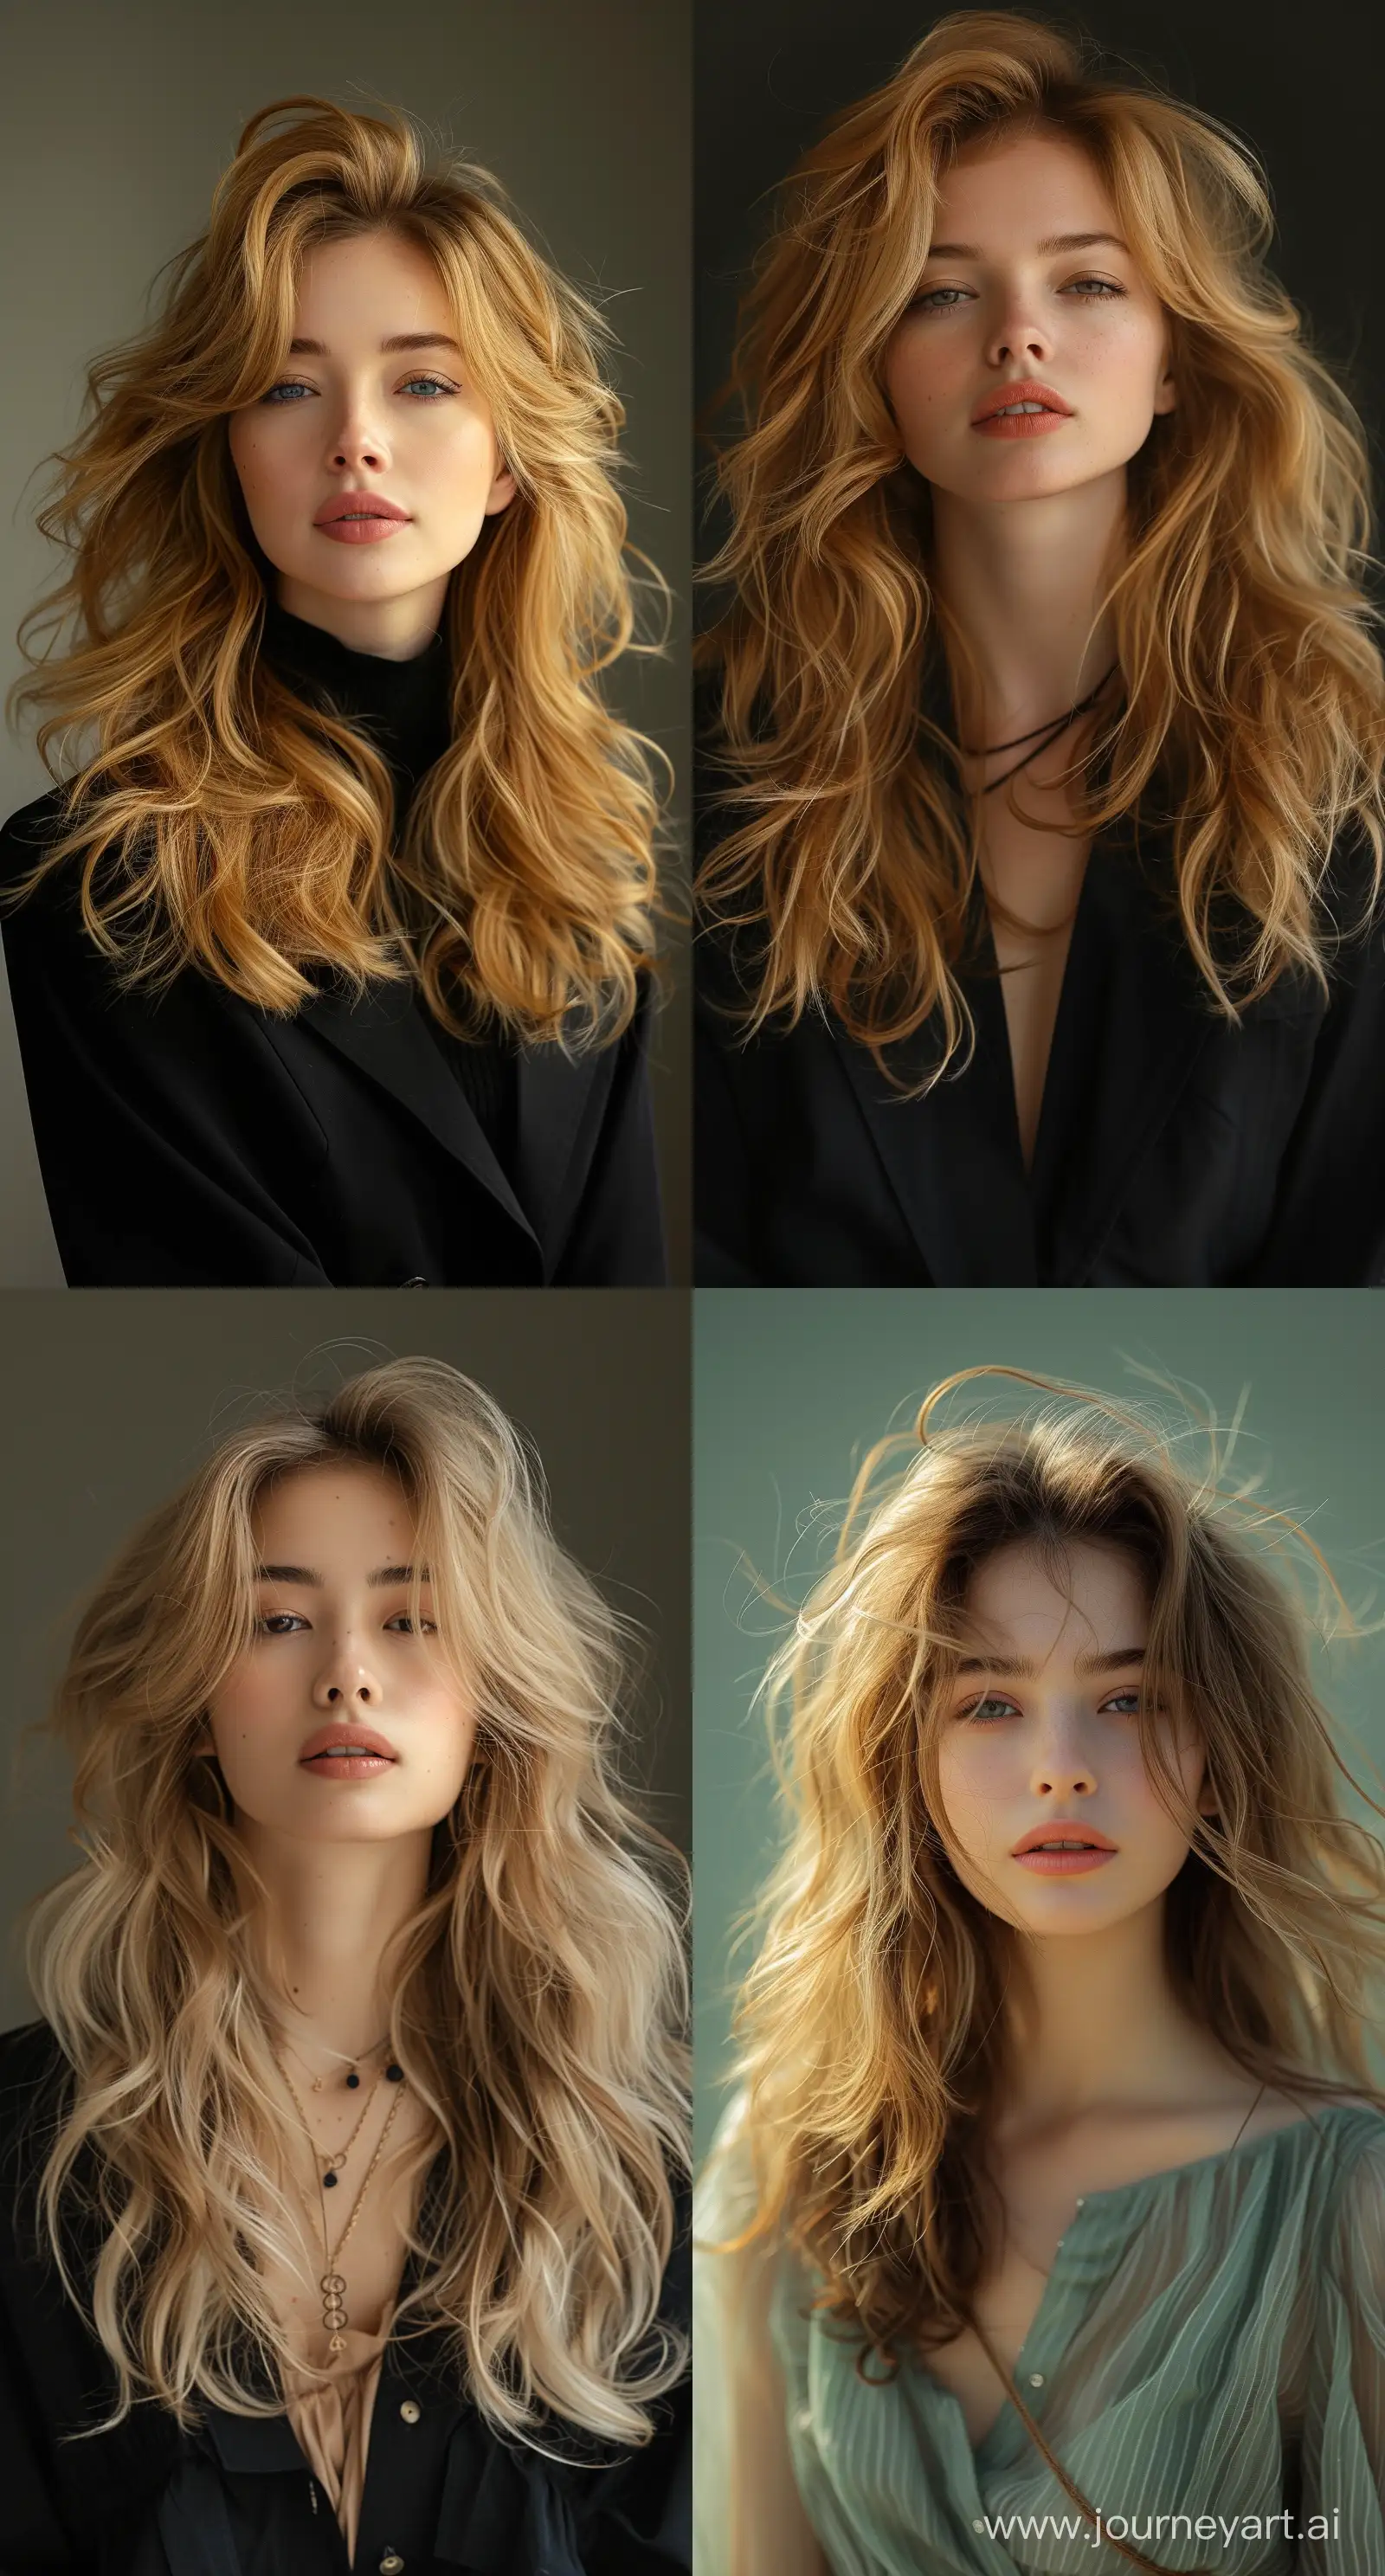 Blonde-Woman-Poses-with-Raw-Emotion-Dain-Yoon-Style-Portrait